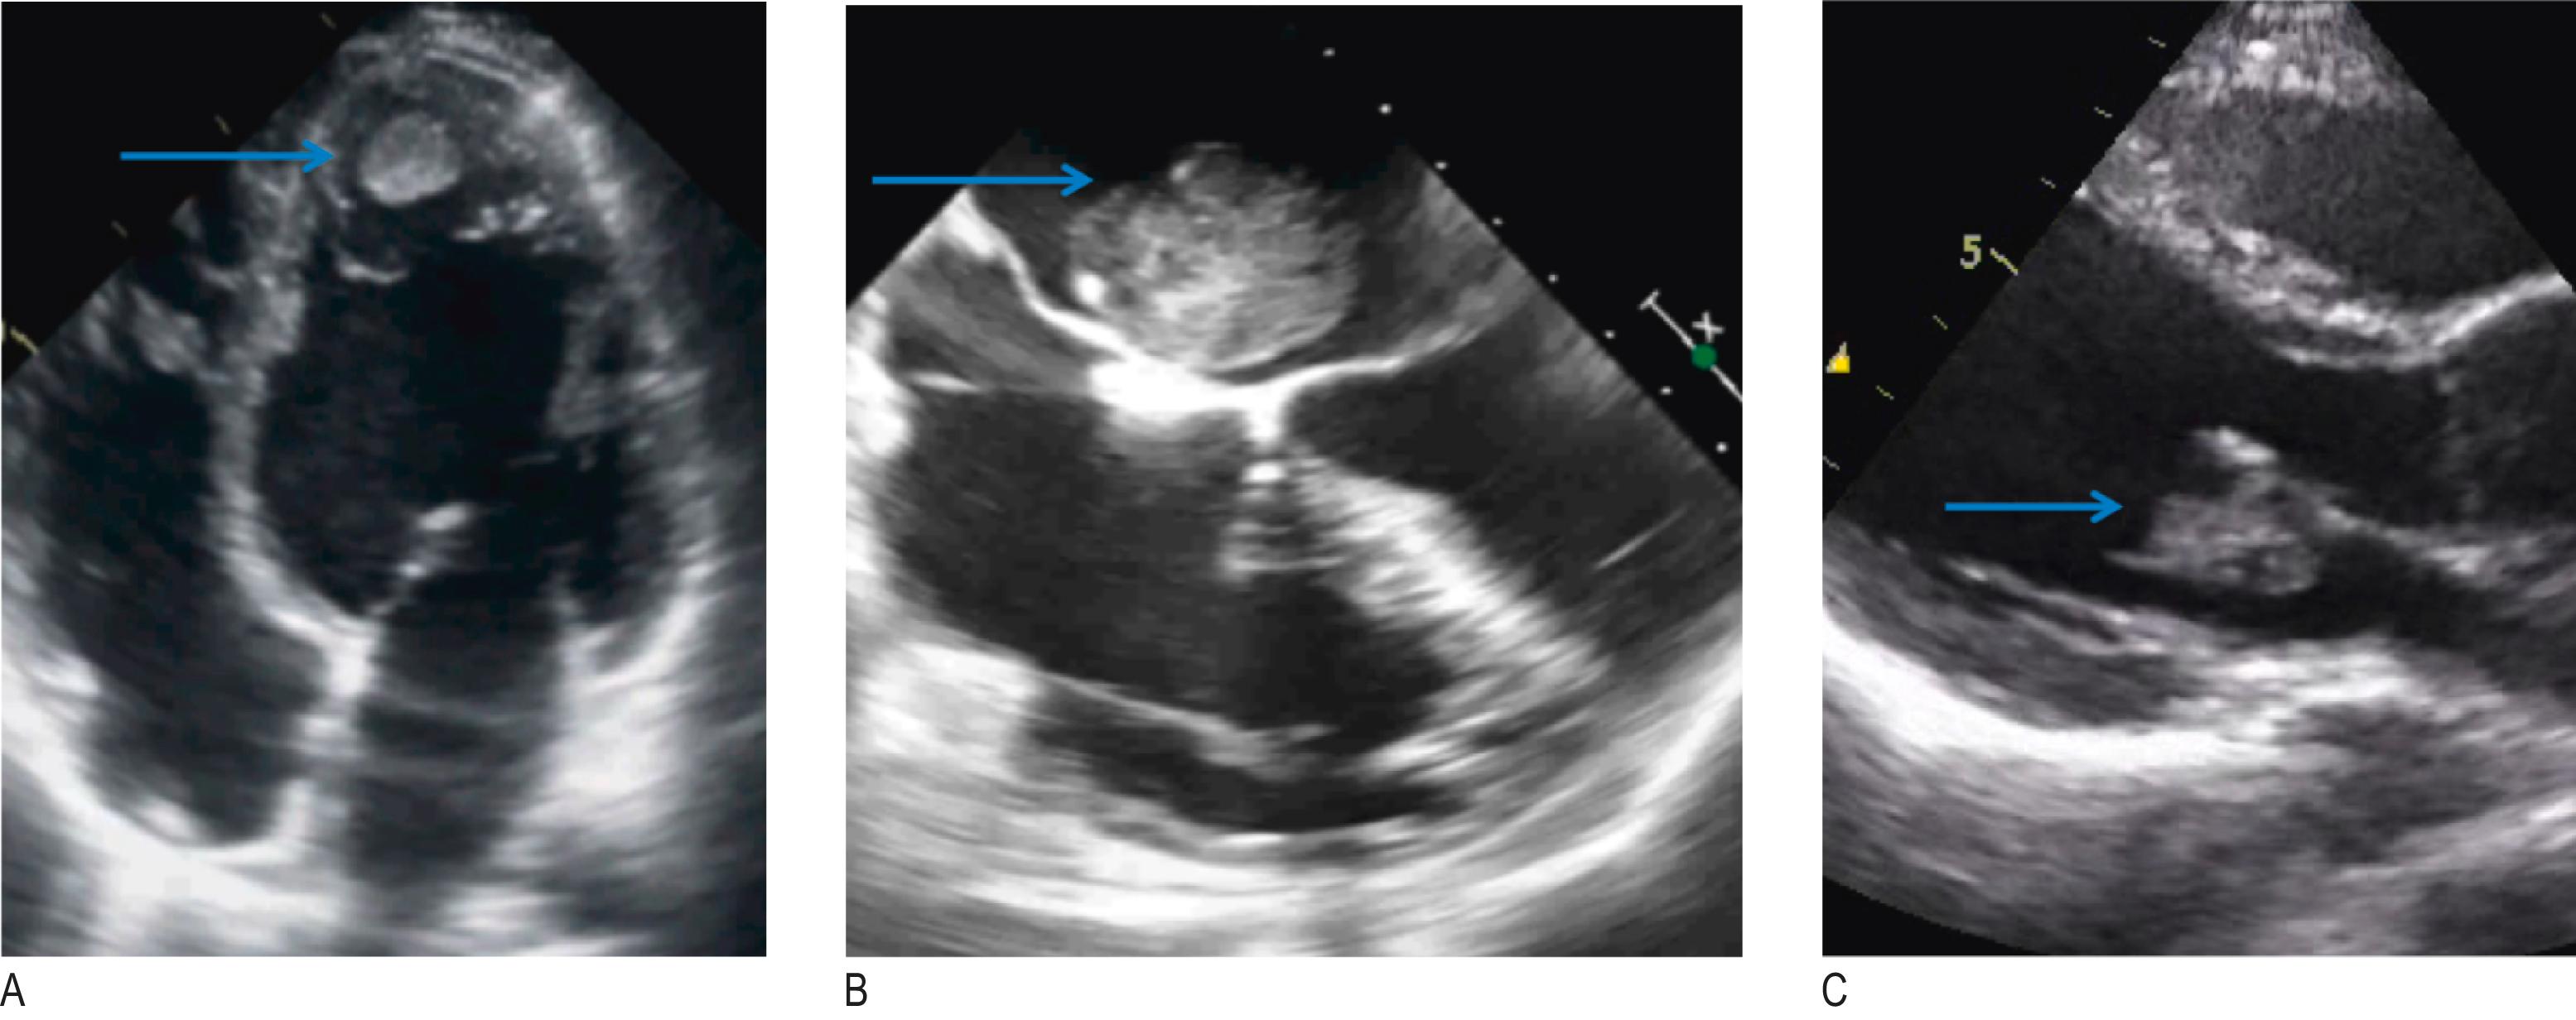 Fig. 4.4, Cardiac sources of systemic embolism: echocardiographic images.